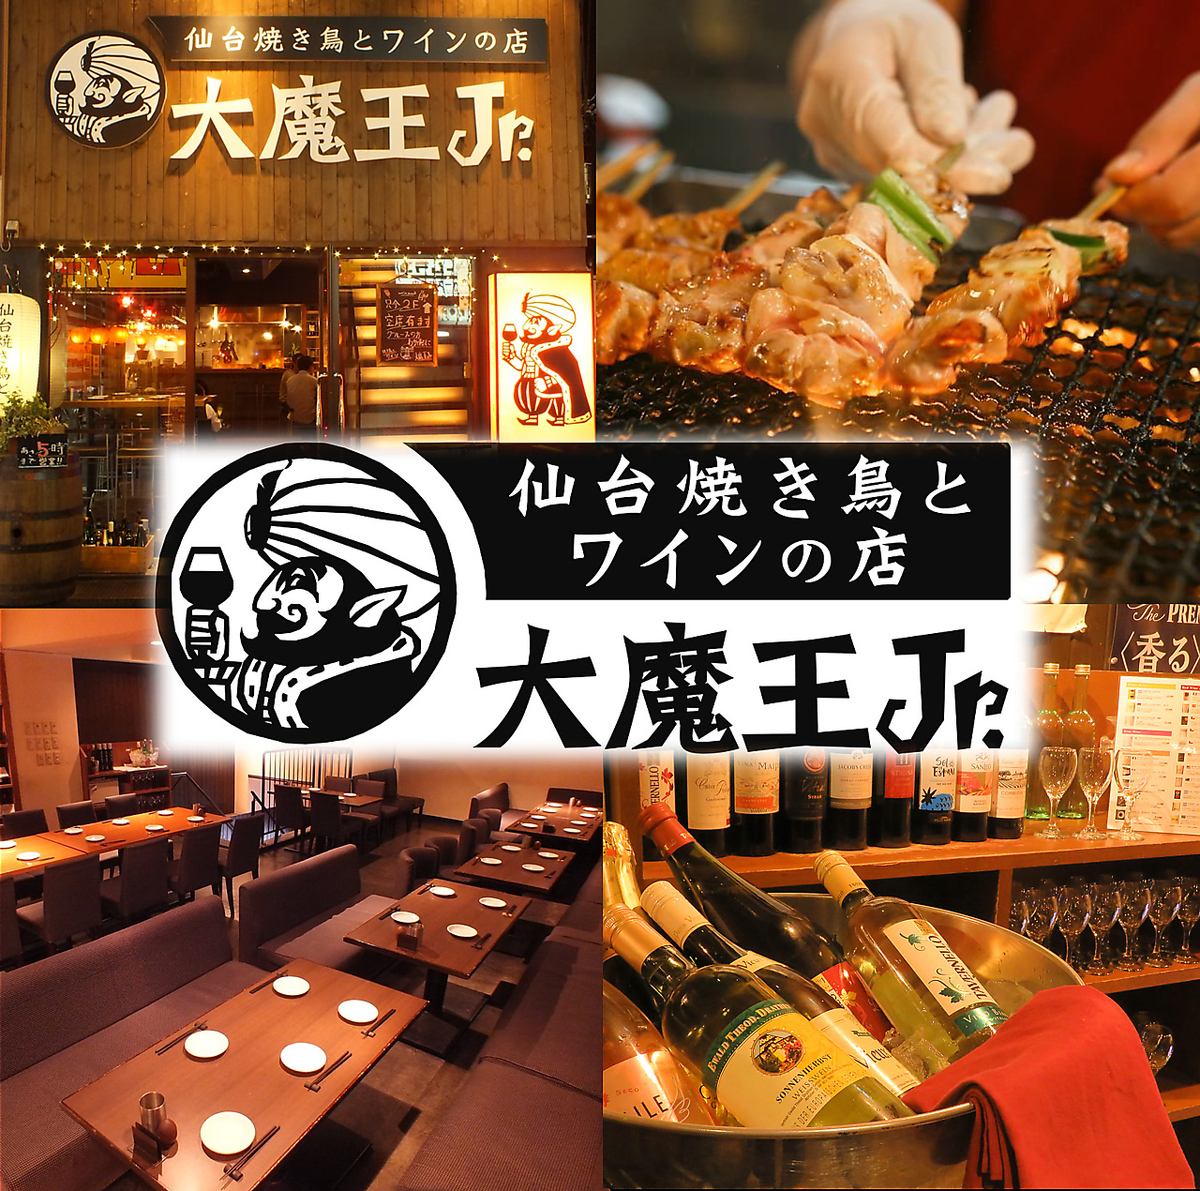 Our stylish bar-style restaurant is conveniently located in Kokubuncho and can be used for a variety of occasions.